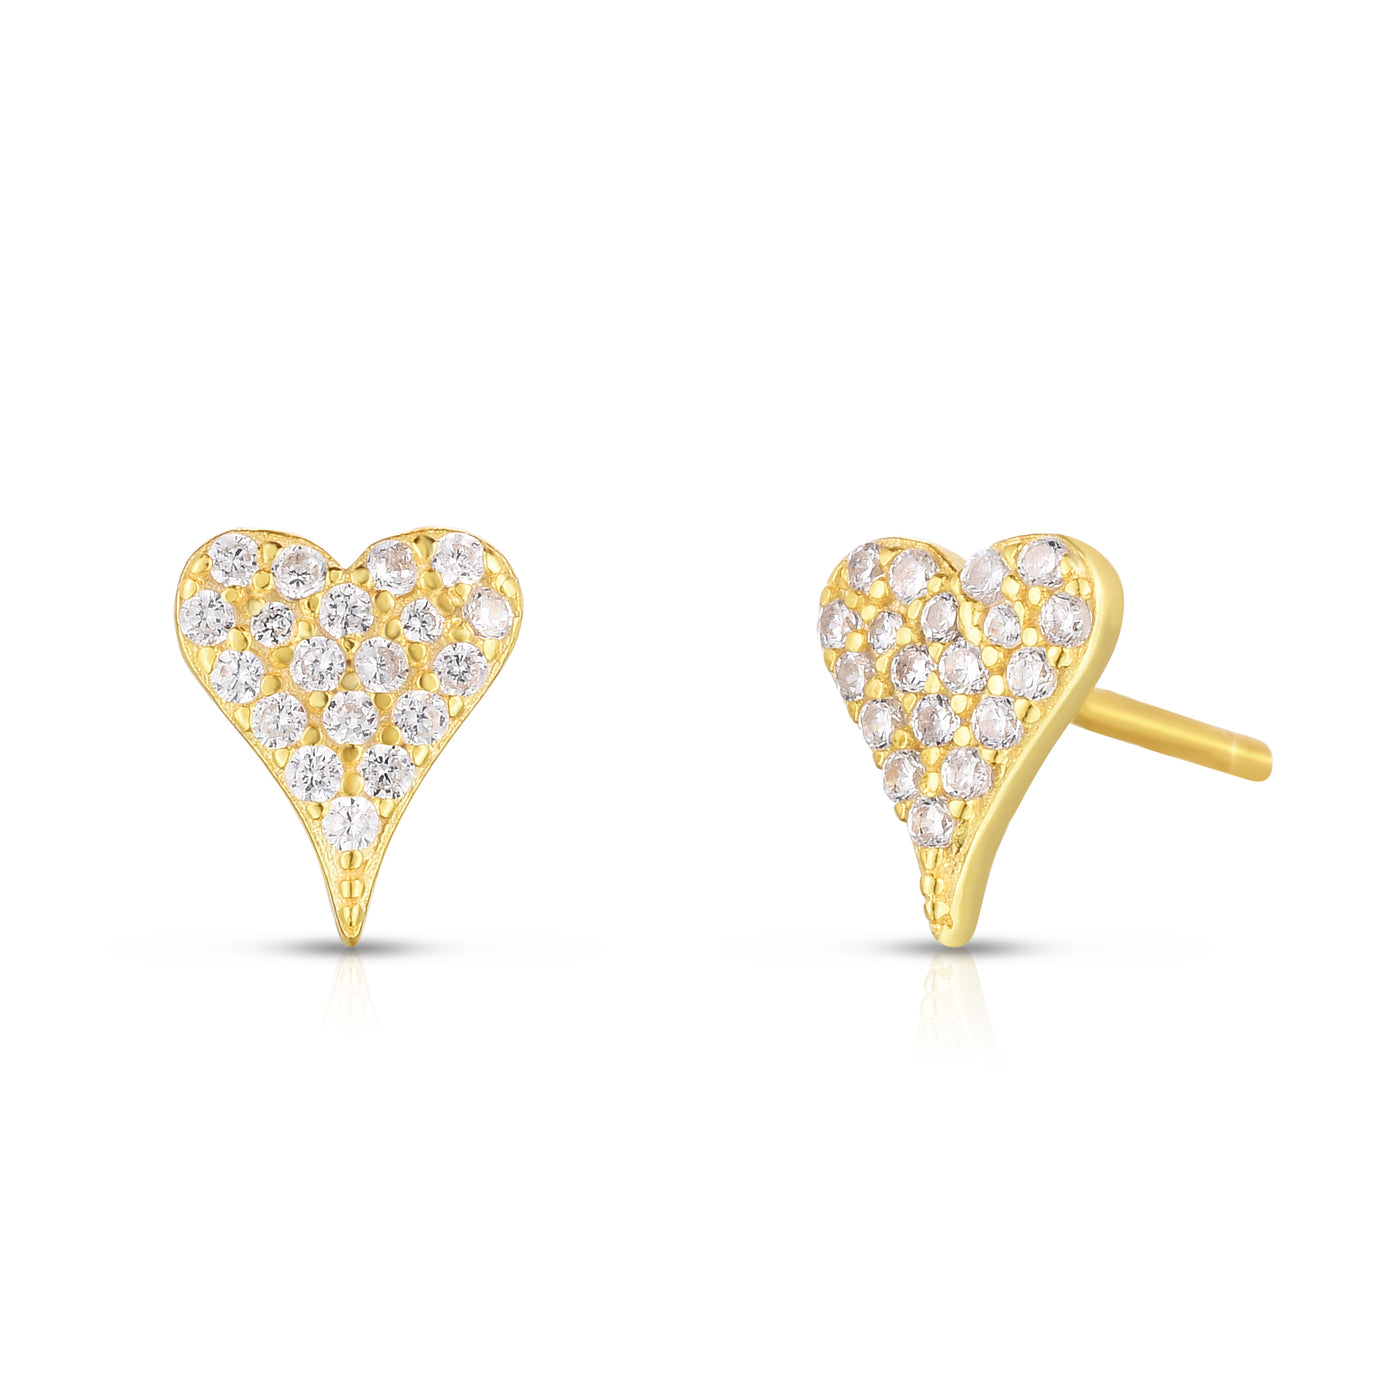 LEILANI - The Heart Studs